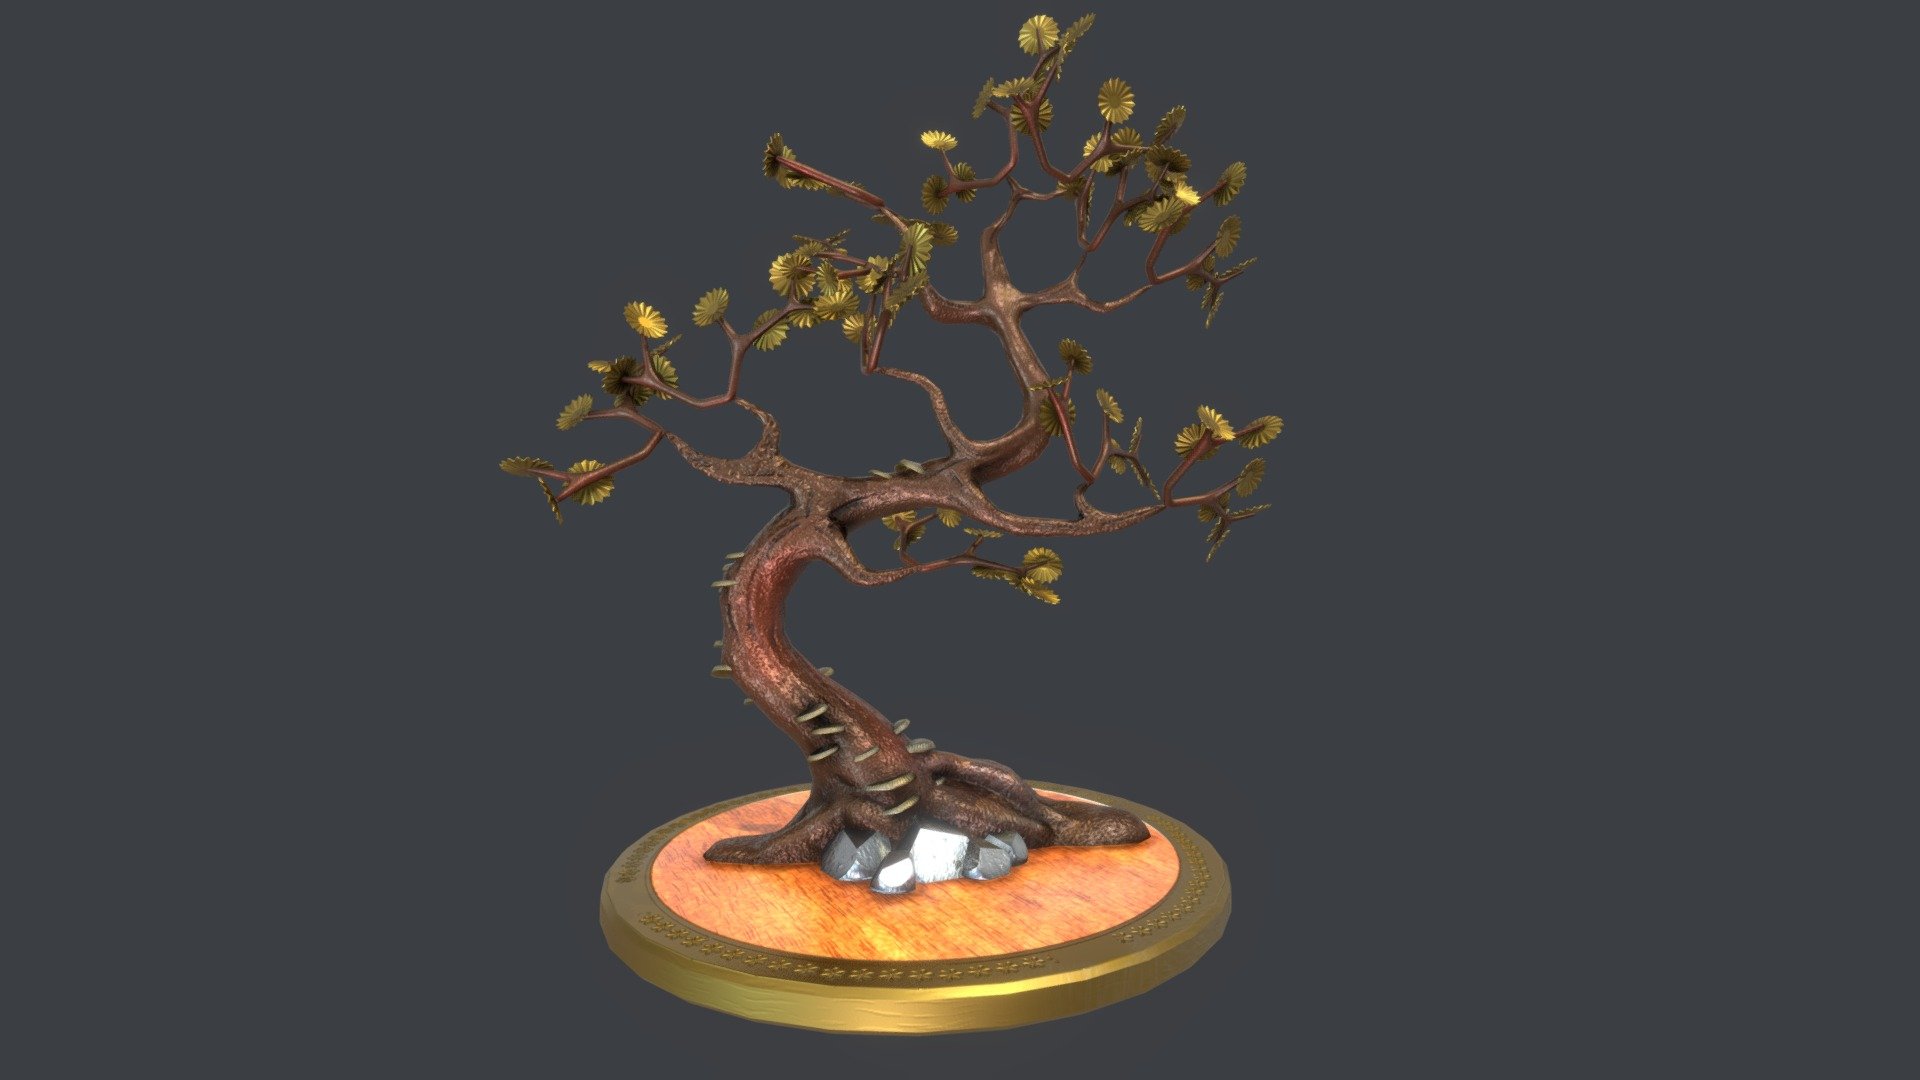 made using blender, Substance Painter.  A cool table top ornament to assist in the finer details of furnishing a scene.  Great model to be placed on a desk, coffee table, bookshelf and other surface areas to accent your scene - Tree Ornament - Download Free 3D model by Rakshaan 3d model